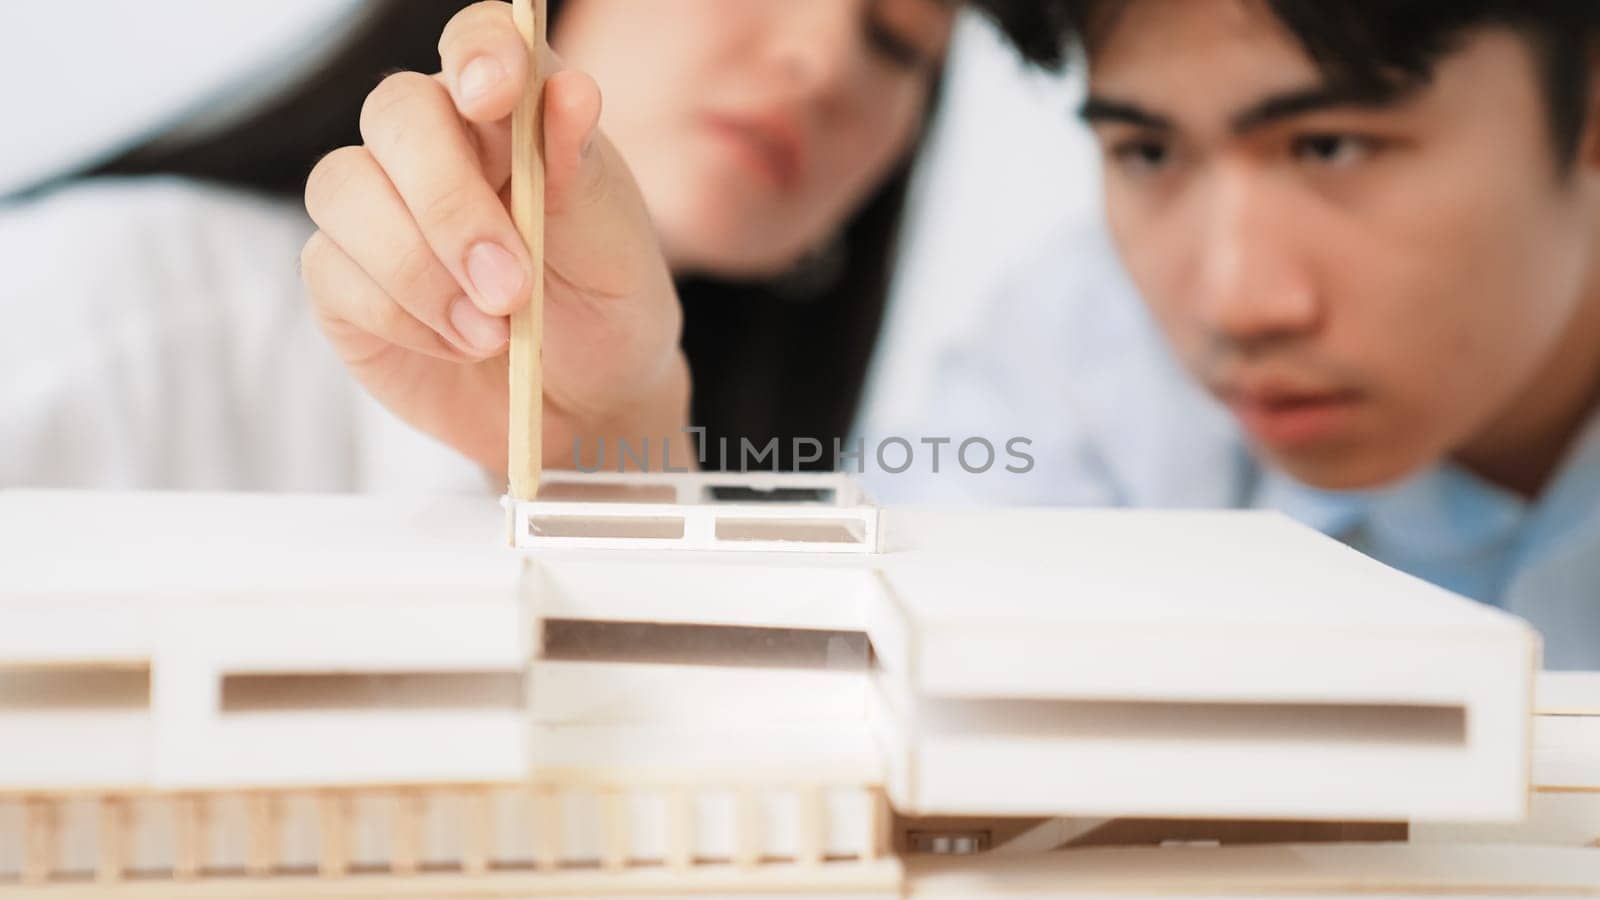 Closeup of young professional architect team work together to use pencil testing house model durability about house construction. Creative design and teamwork concept. Focus on hand. Immaculate.